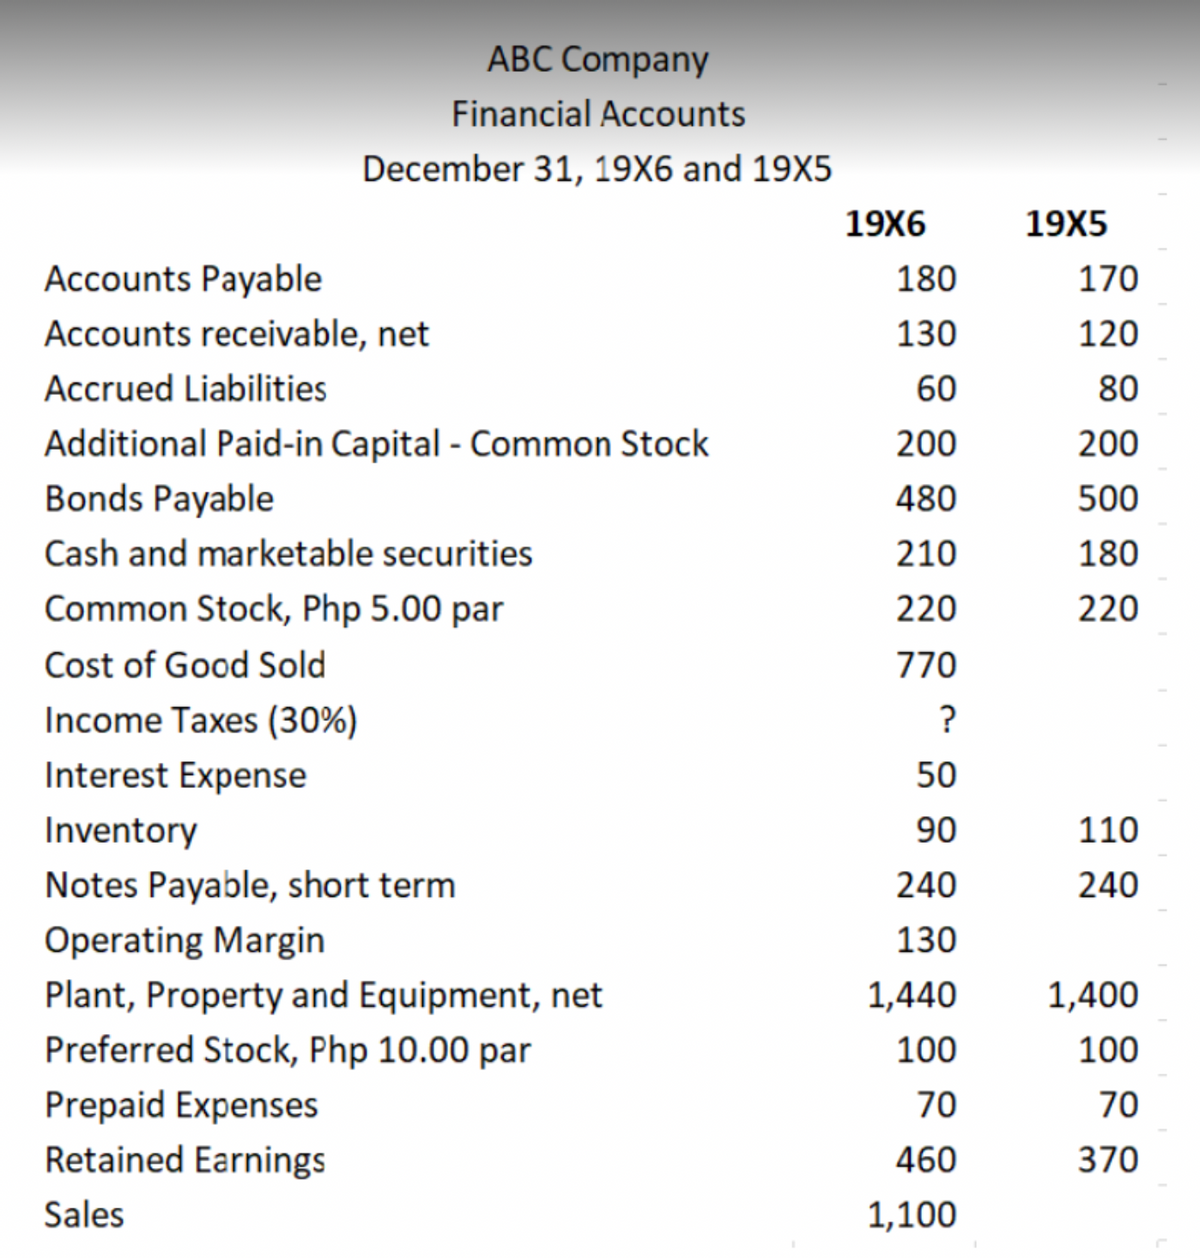 ABC Company
Financial Accounts
December 31, 19X6 and 19X5
19X6
19X5
Accounts Payable
180
170
Accounts receivable, net
130
120
Accrued Liabilities
60
80
Additional Paid-in Capital - Common Stock
200
200
Bonds Payable
480
500
Cash and marketable securities
210
180
Common Stock, Php 5.00 par
220
220
Cost of Good Sold
770
Income Taxes (30%)
?
Interest Expense
50
Inventory
90
110
Notes Payable, short term
240
240
Operating Margin
130
Plant, Property and Equipment, net
1,440
1,400
Preferred Stock, Php 10.00 par
100
100
Prepaid Expenses
70
70
Retained Earnings
460
370
Sales
1,100
